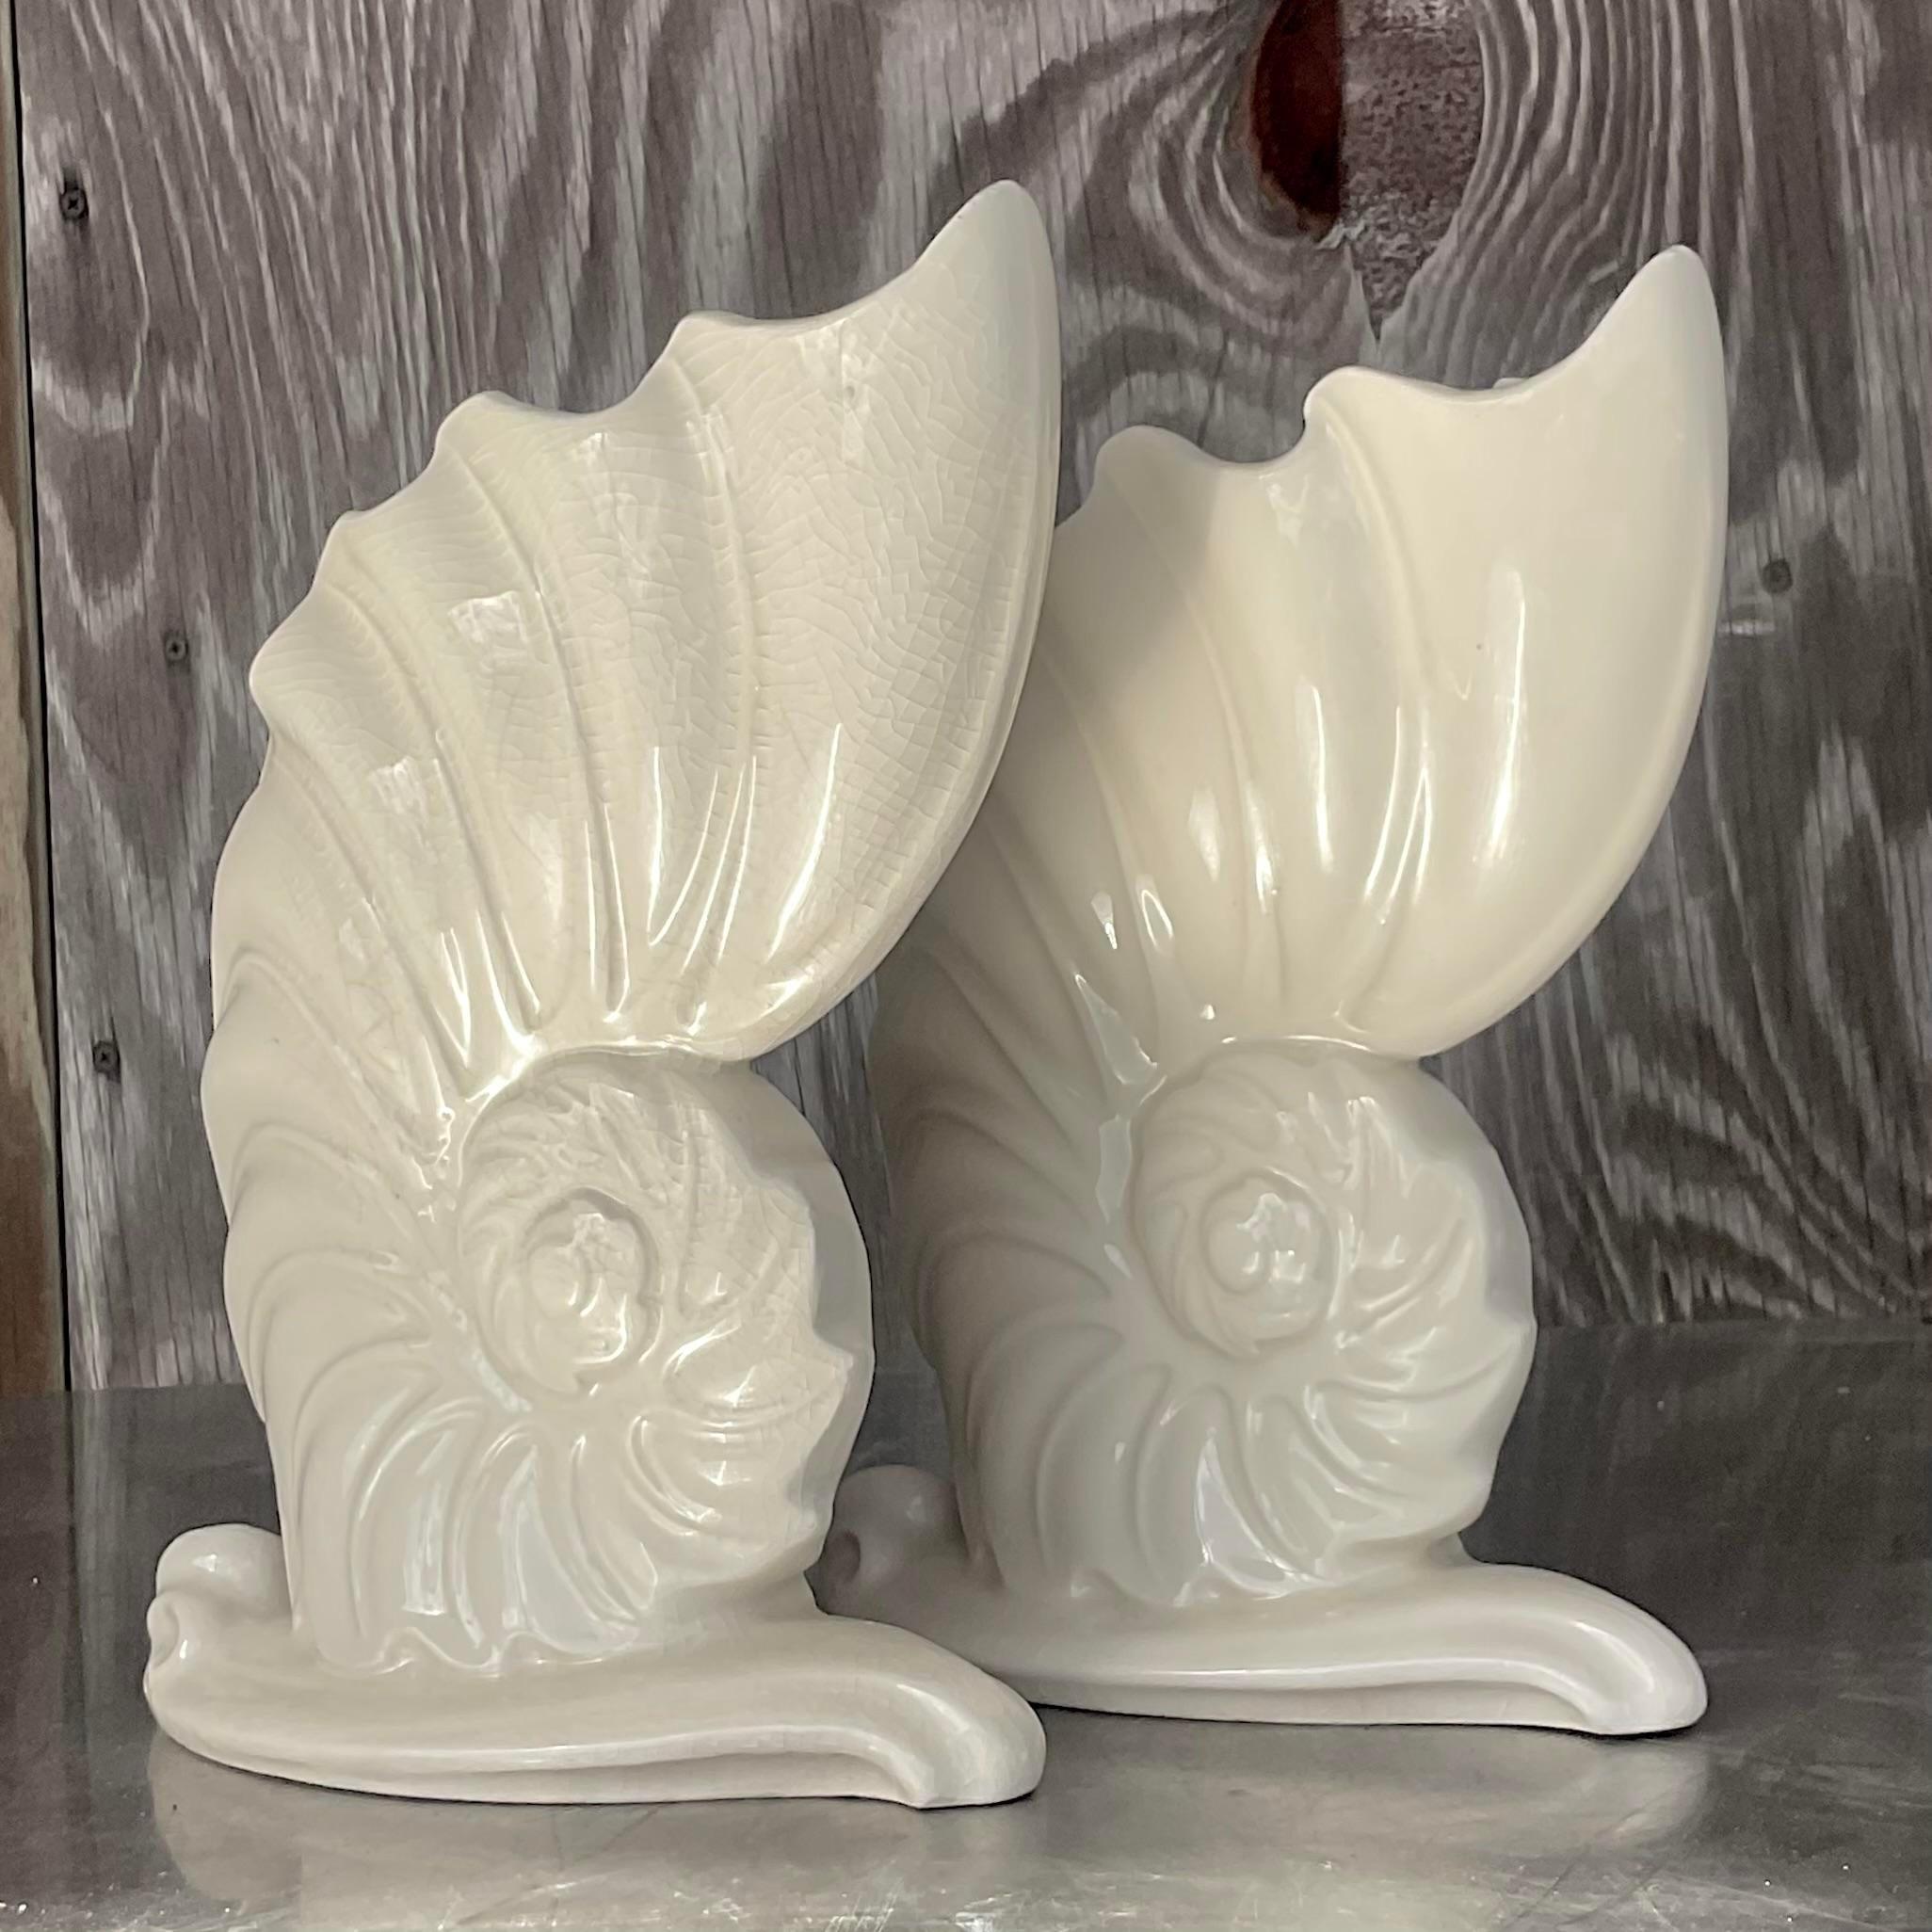 Vintage Coastal Abstract Nautilus Shell Glazed Ceramic Vases - a Pair For Sale 1